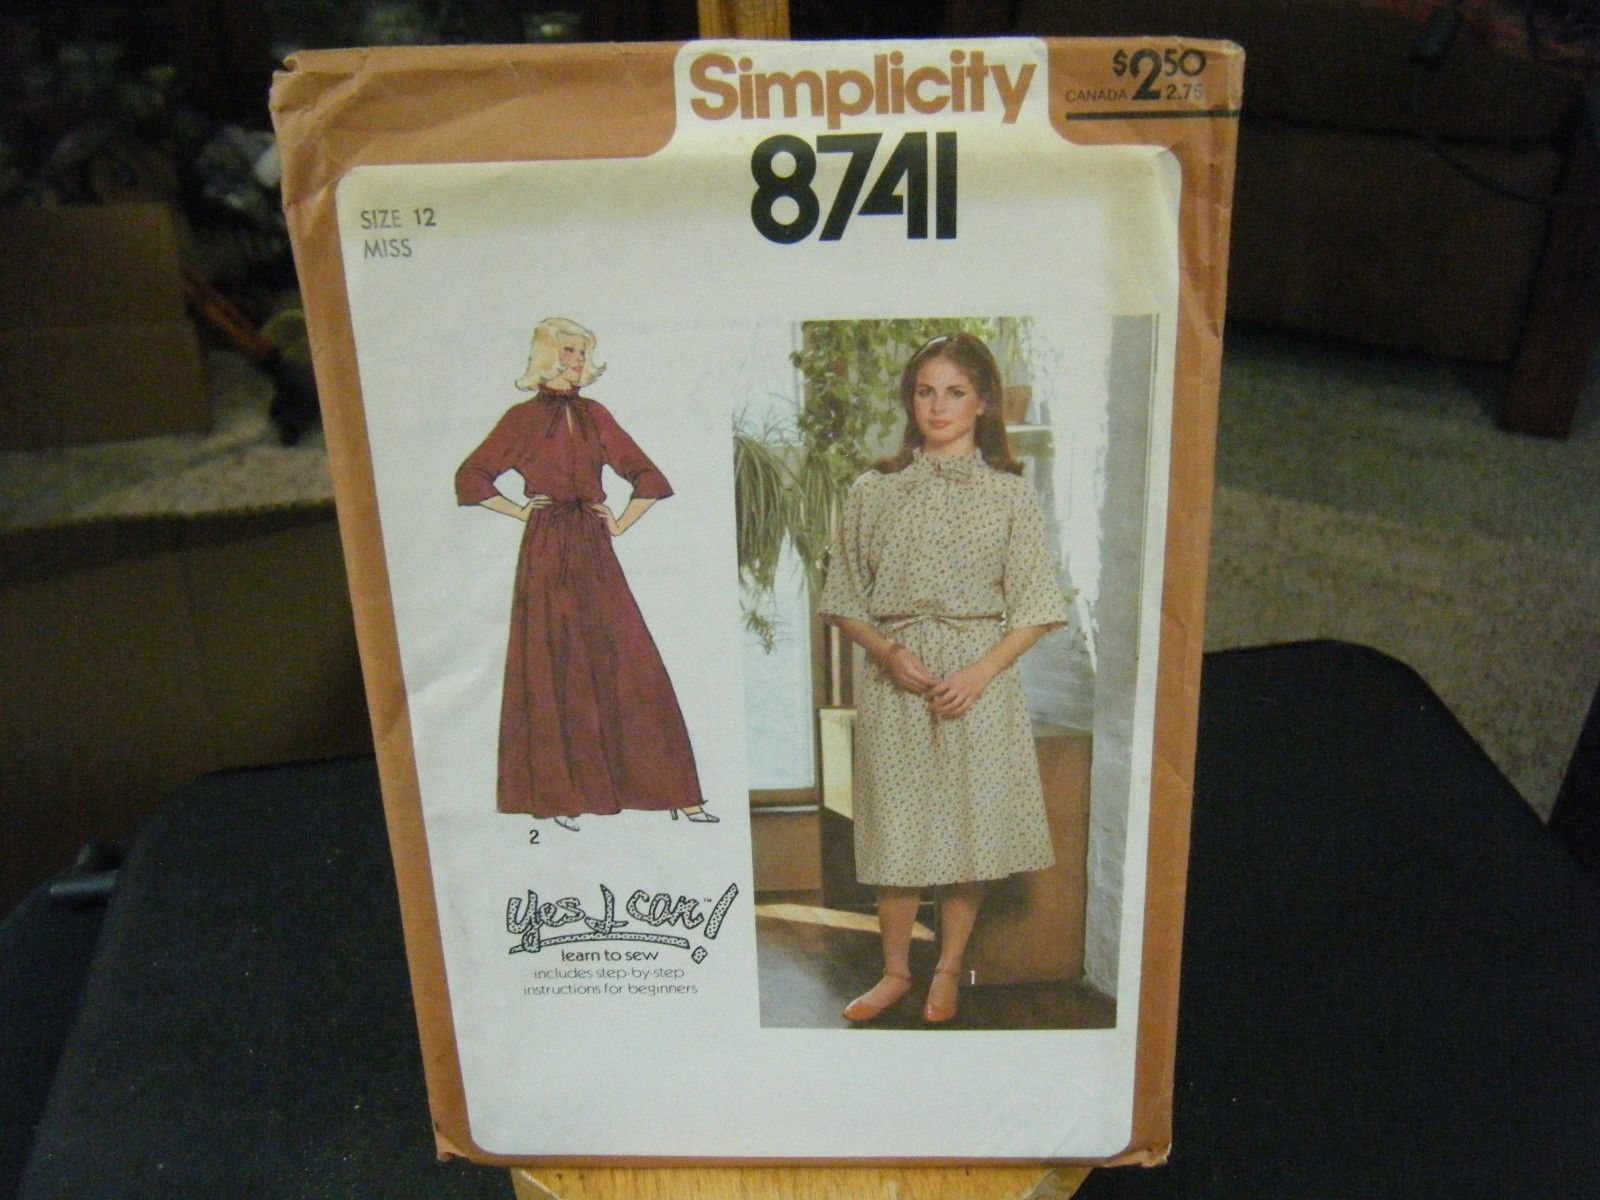 Primary image for Simplicity 8741 Misses Pullover Dress in 2 Lengths Pattern - Size 12 Bust 34